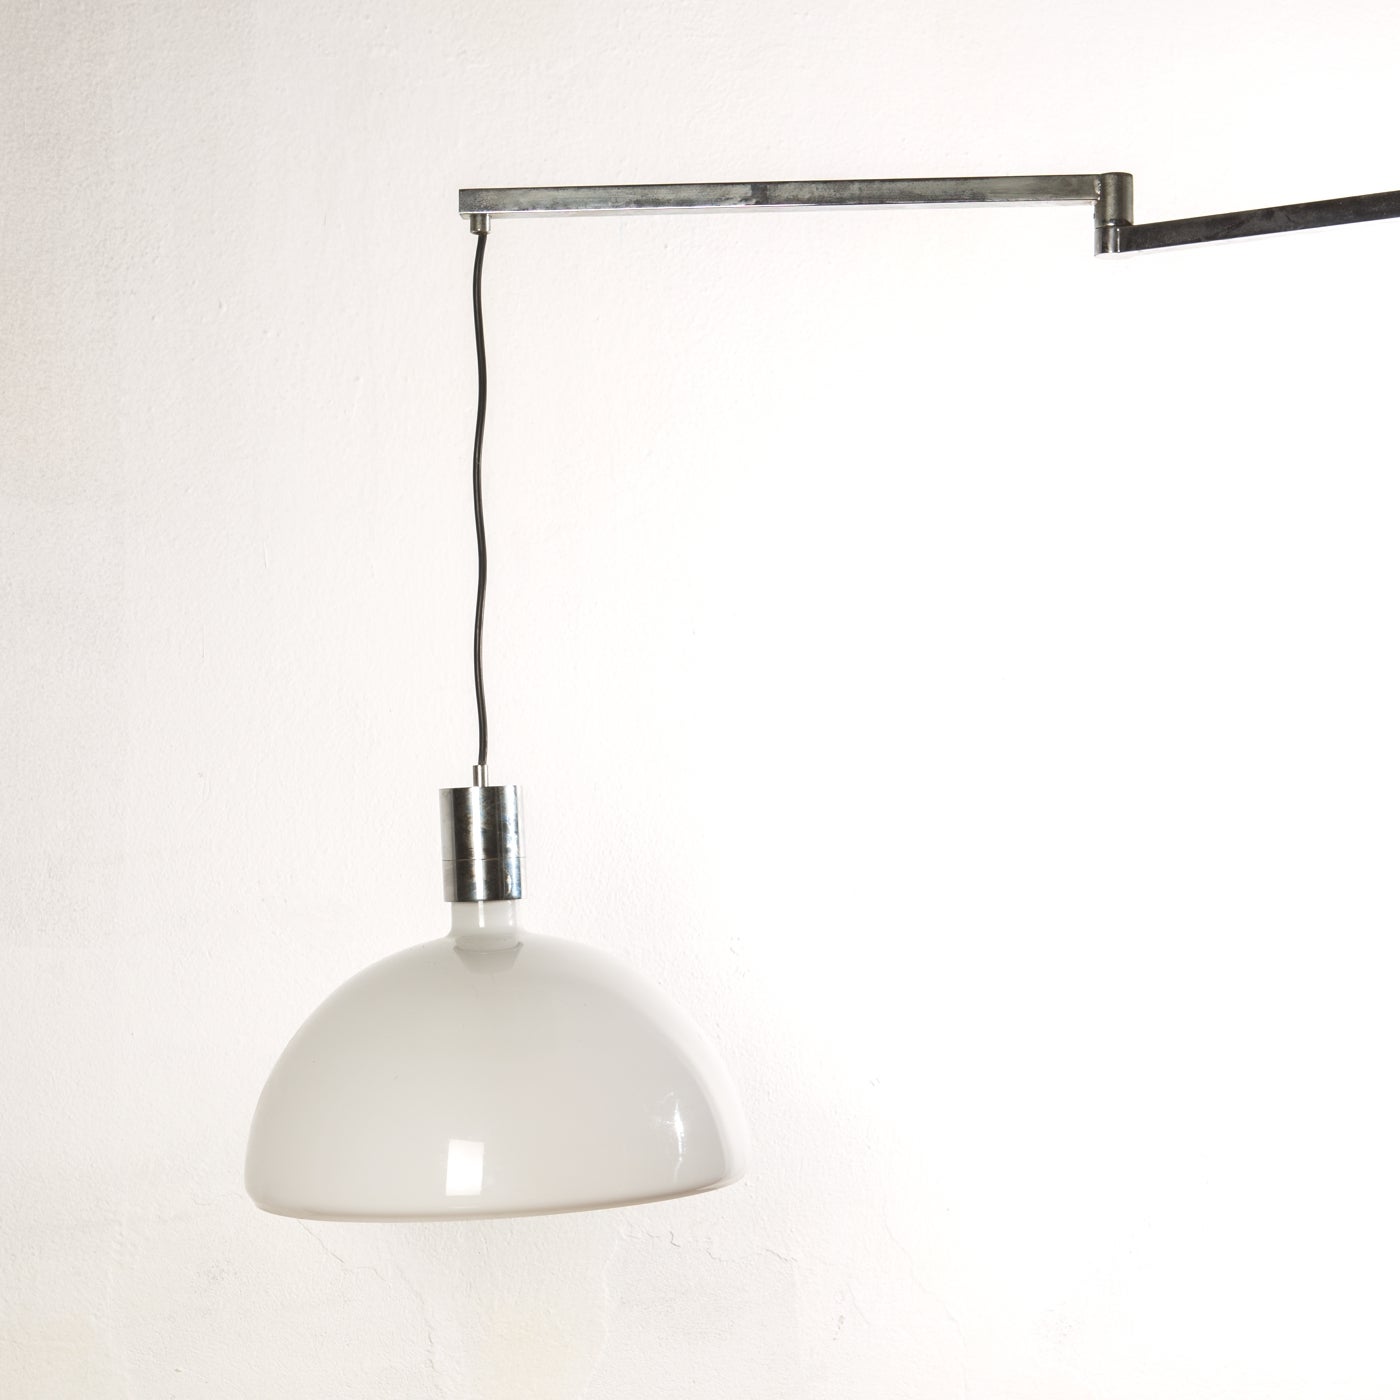 "AM/AS" Adjustable Ceiling Lamp by Albini, Helg and Piva for Sirrah, Italy, 1960 For Sale